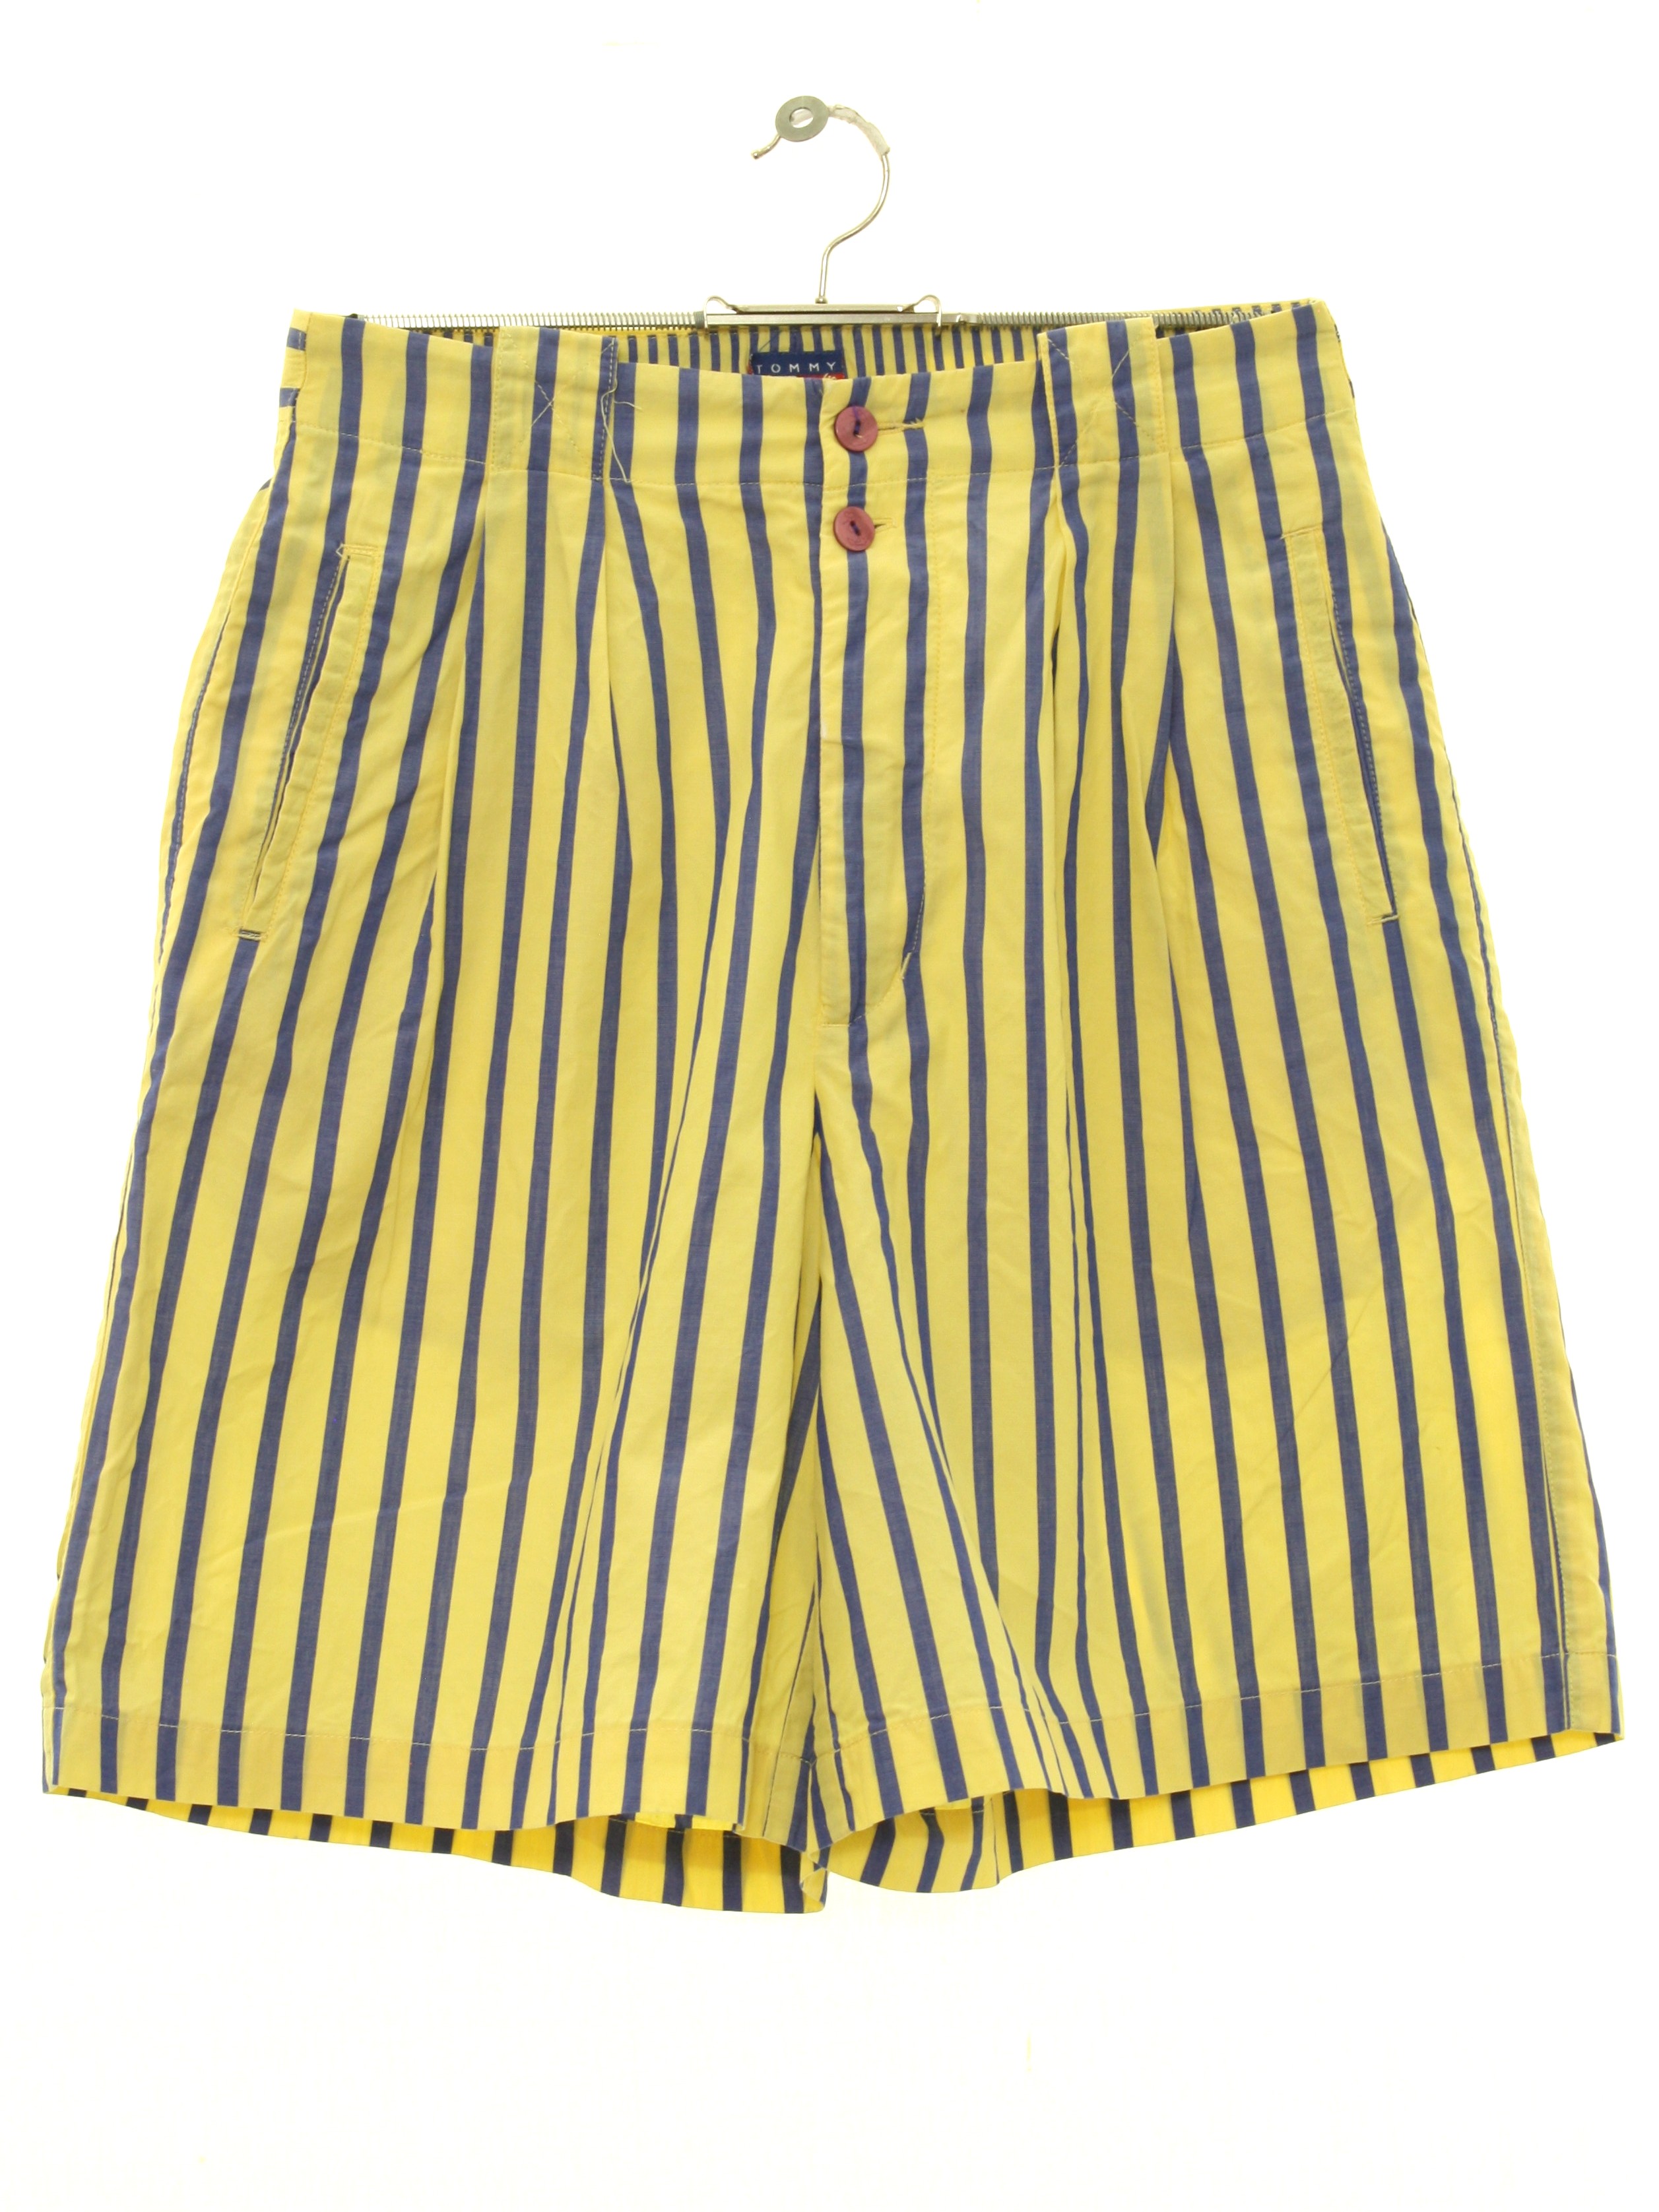 1980's Shorts (Tommy Hilfiger): Late 80s or Early 90s -Tommy Hilfiger ...